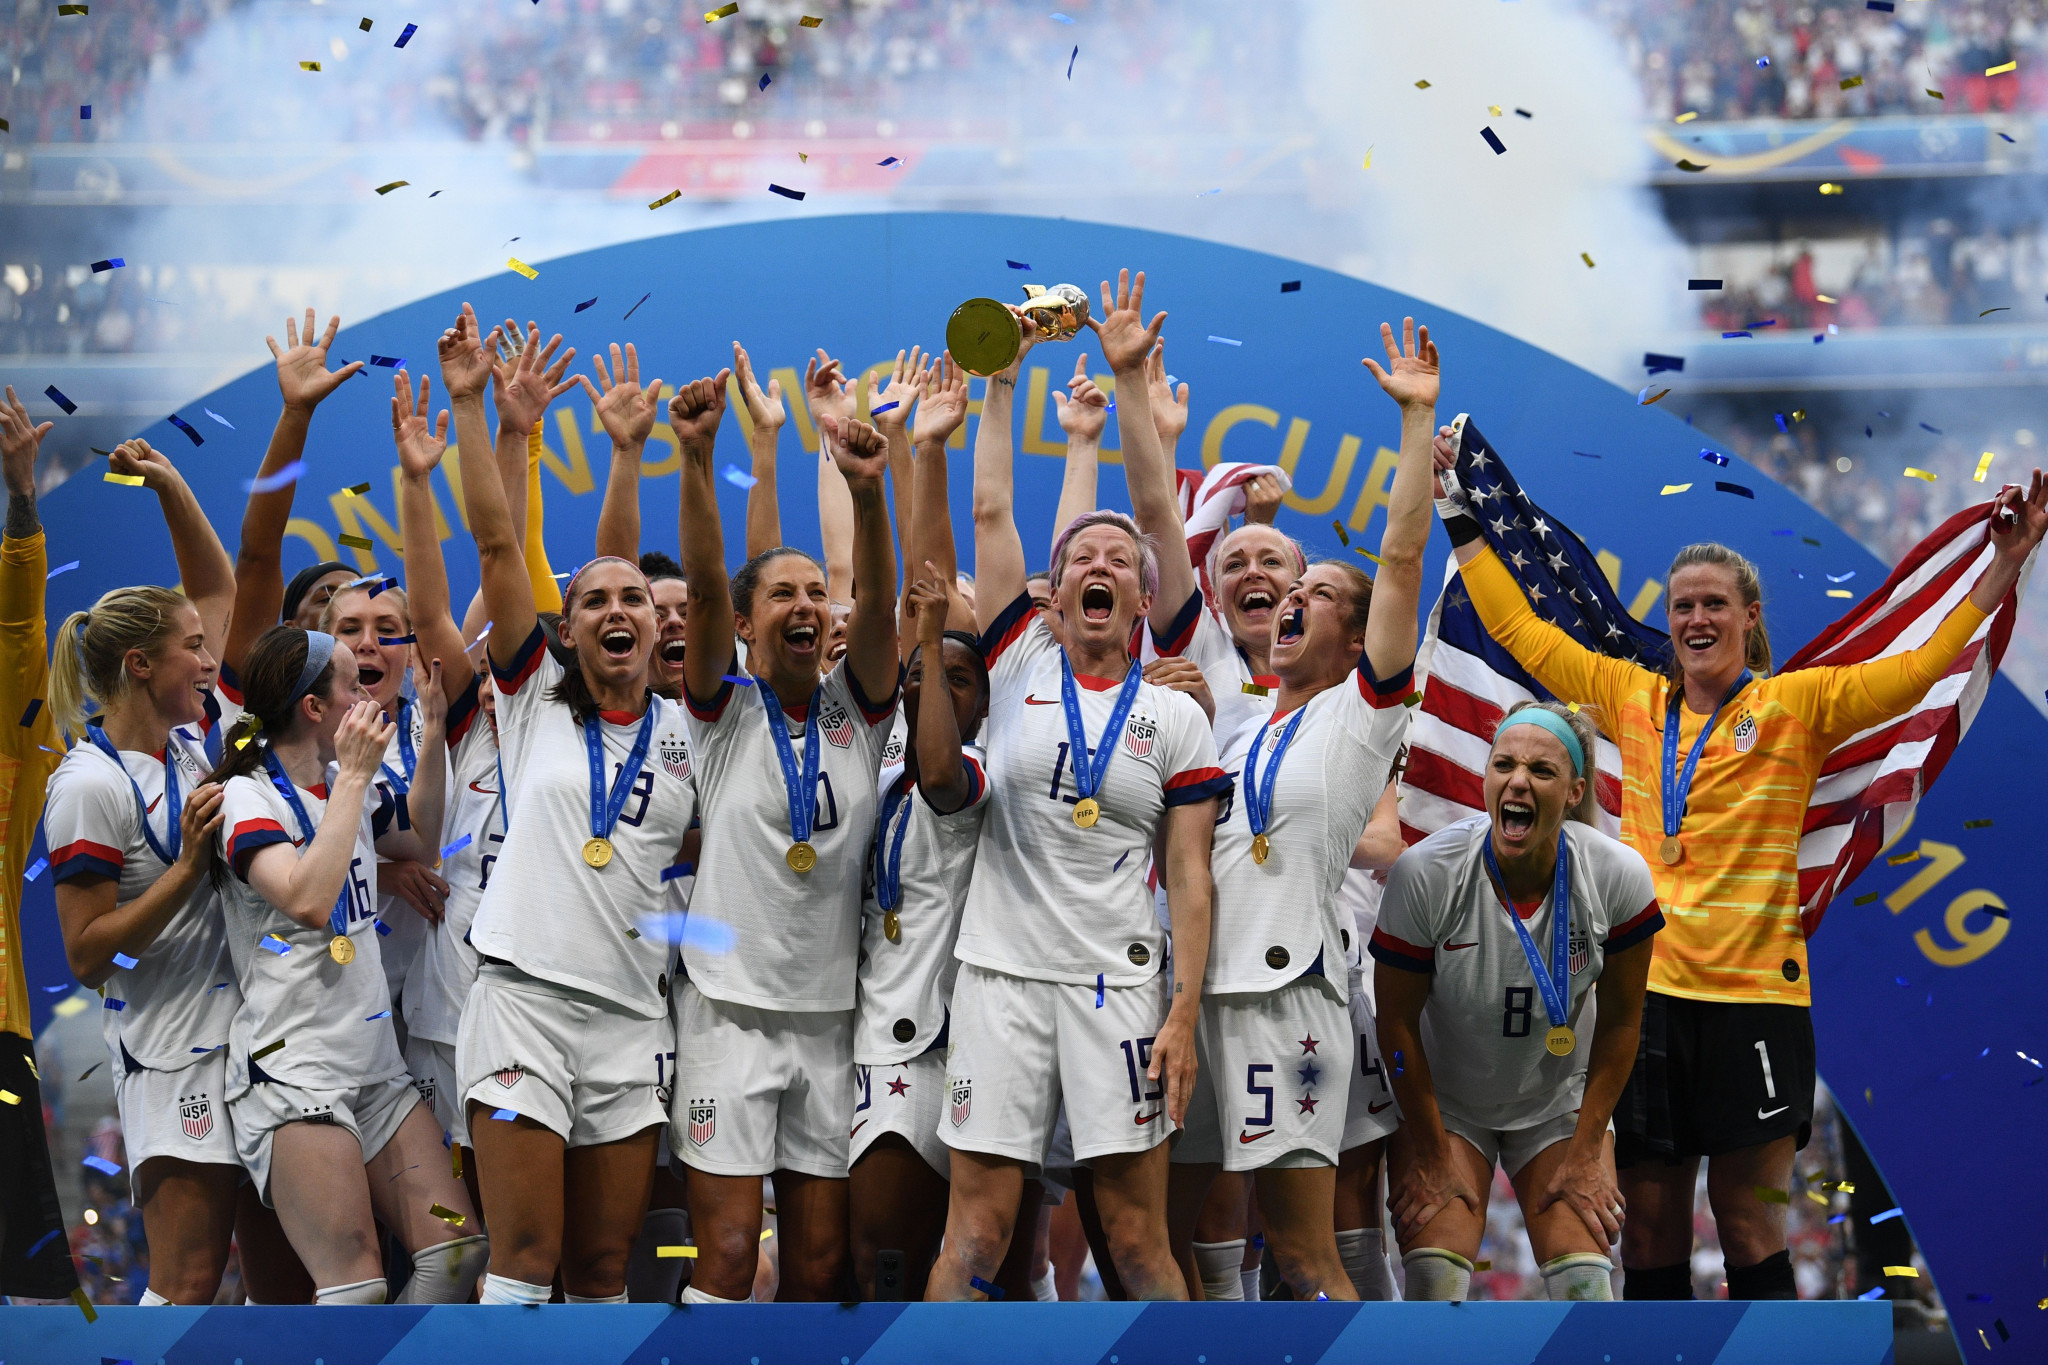 The disparity in prize money between the men's FIFA World Cup and Women's World Cup was raised at the panel discussion ©Getty Images